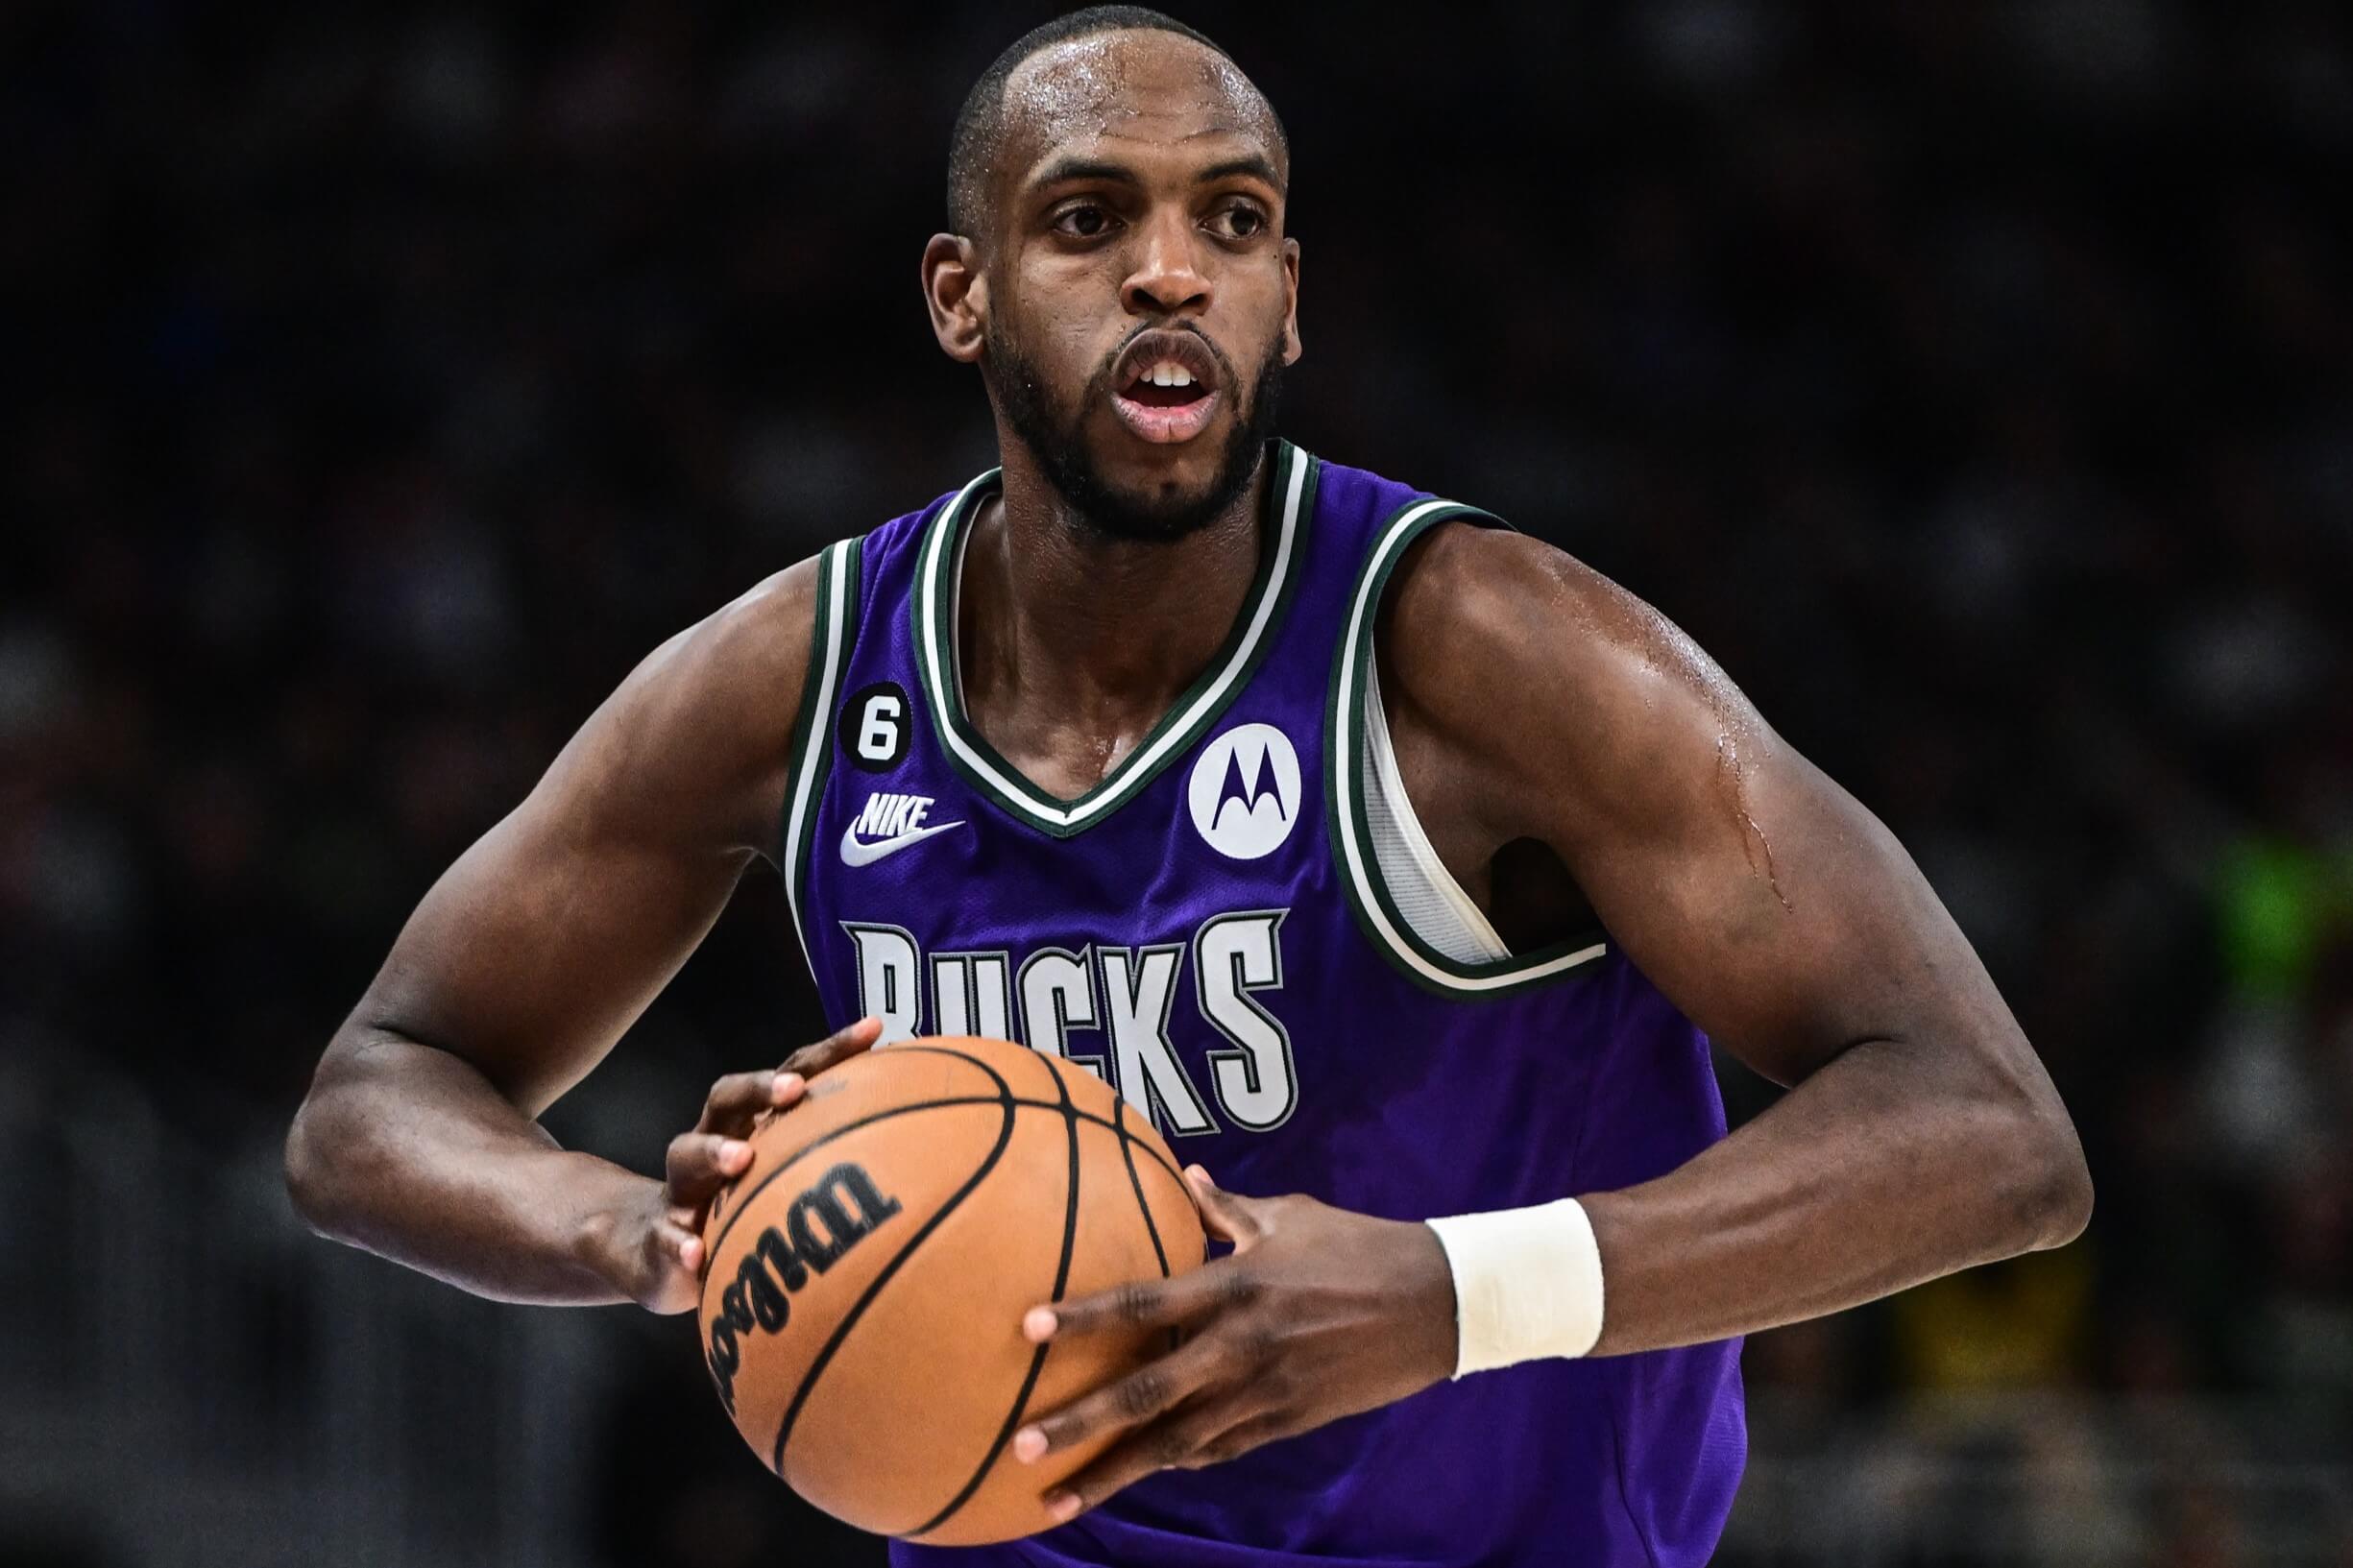 How To Bet - Today’s NBA Player Prop Picks: Middleton at the Top of His Game